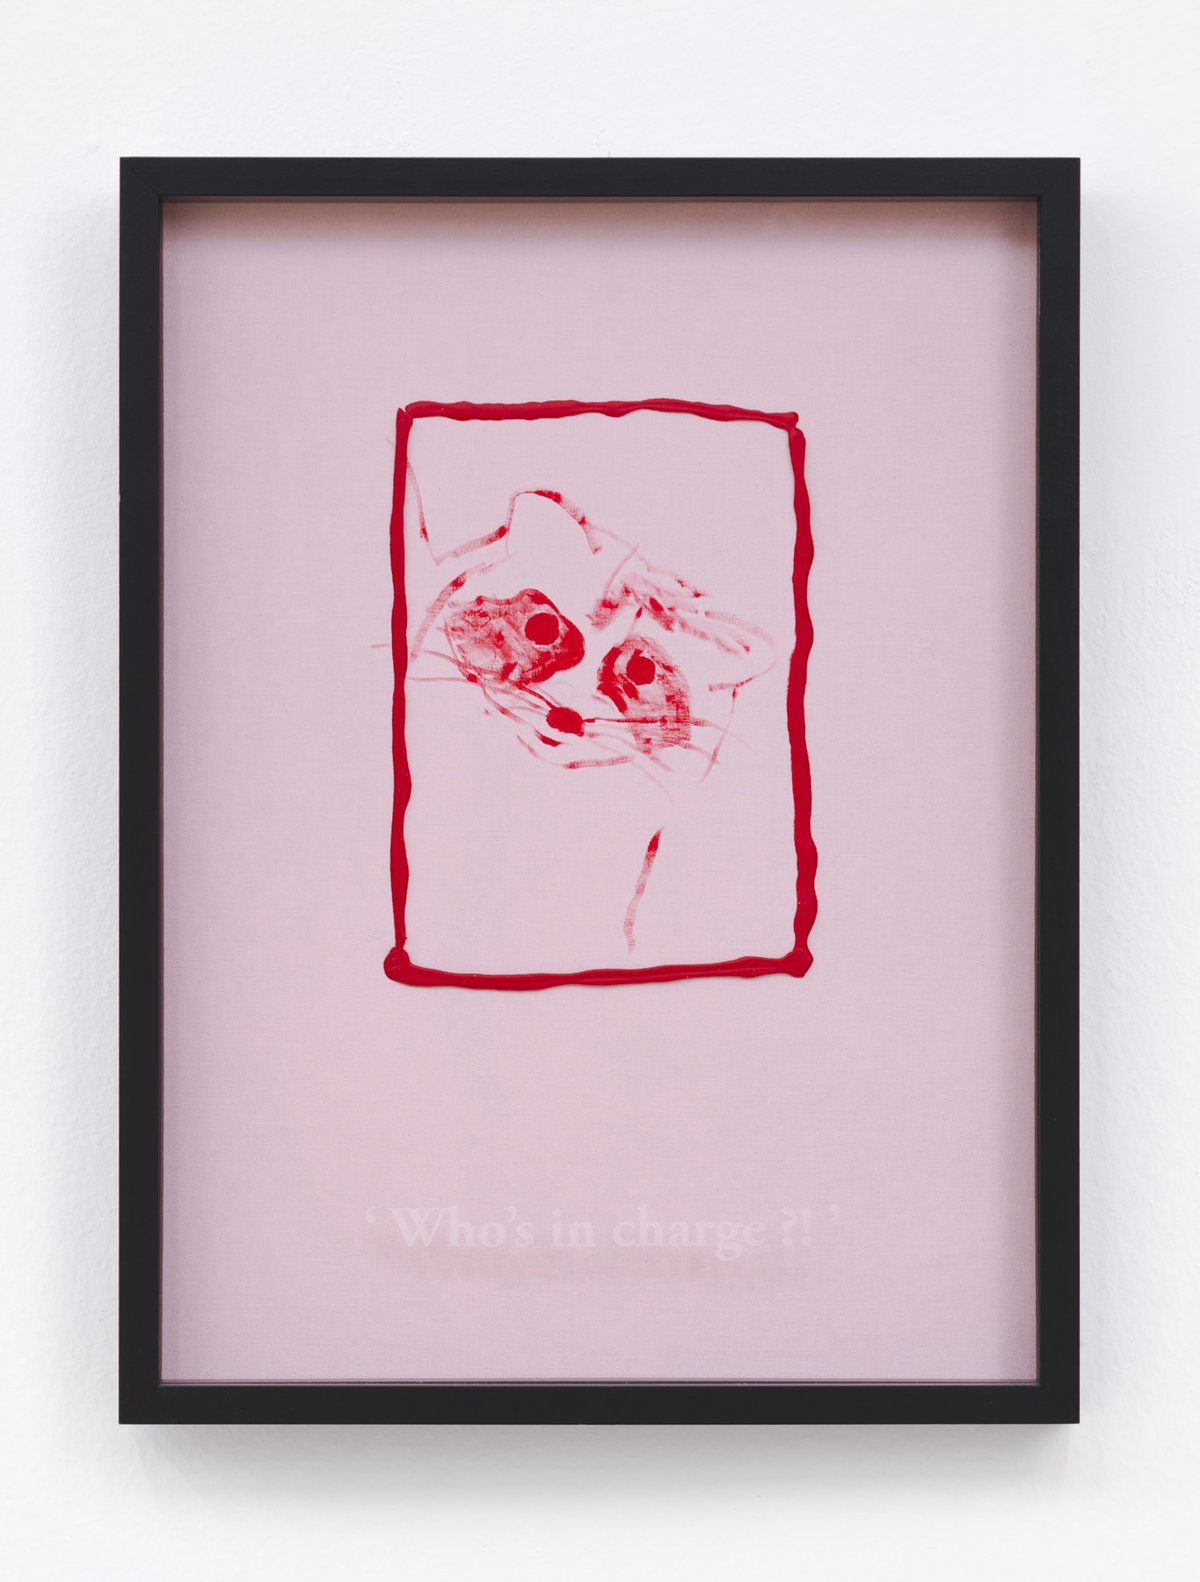 Philipp Timischl&quot;Who&#x27;s in charge?!&quot; (Rose/Cadmium Red), 2017Acrylic on linen and glass-engraved object frame40.1 x 32.1 cm